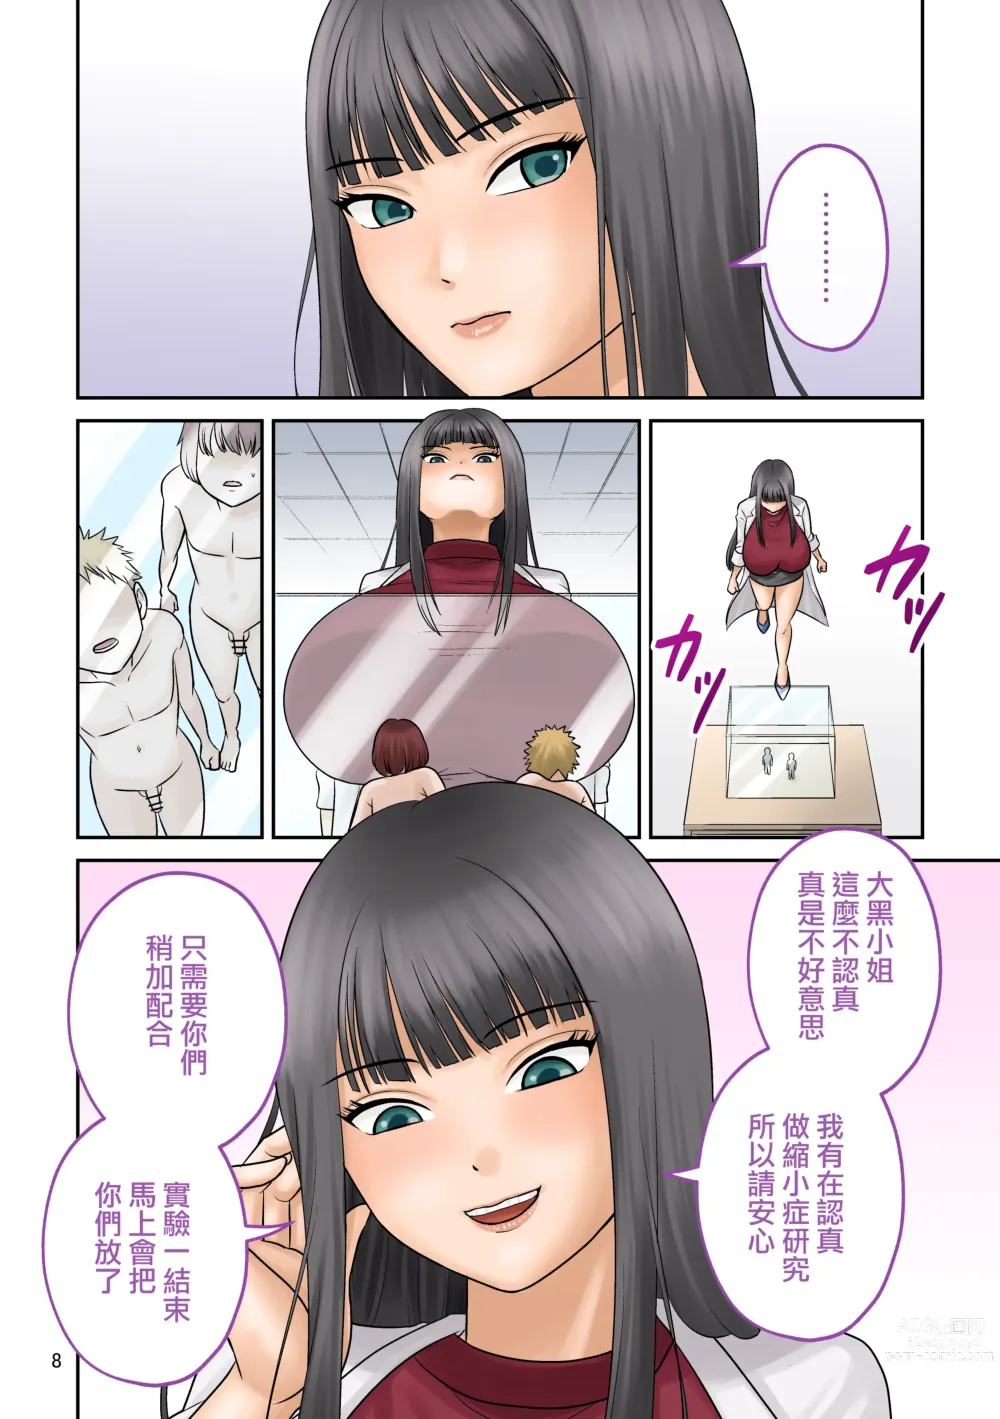 Page 9 of doujinshi Little・shorts